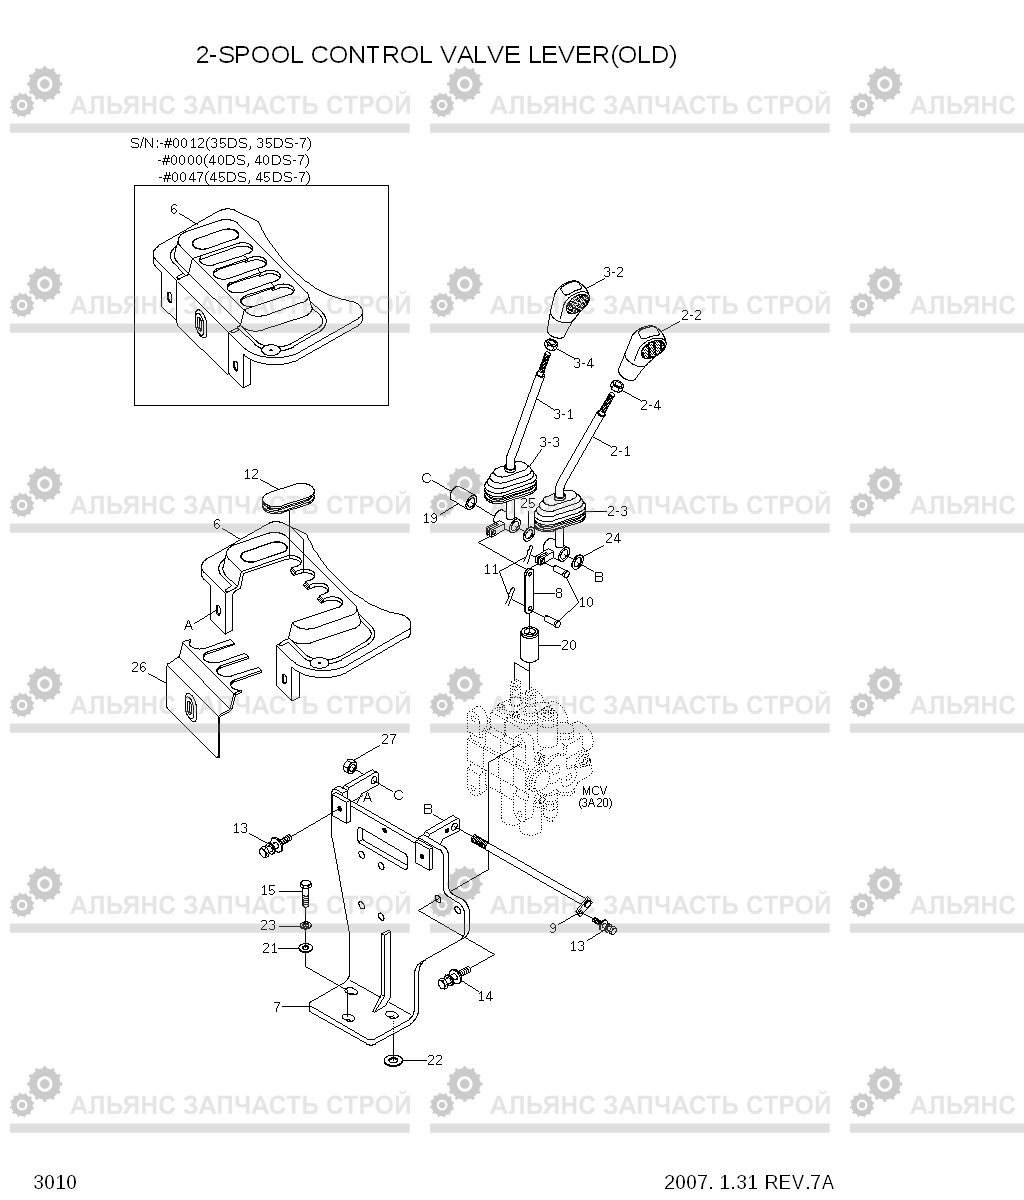 3010 2-SPOOL CONTROL VALVE LEVER(OLD) 35DS/40DS/45DS-7, Hyundai